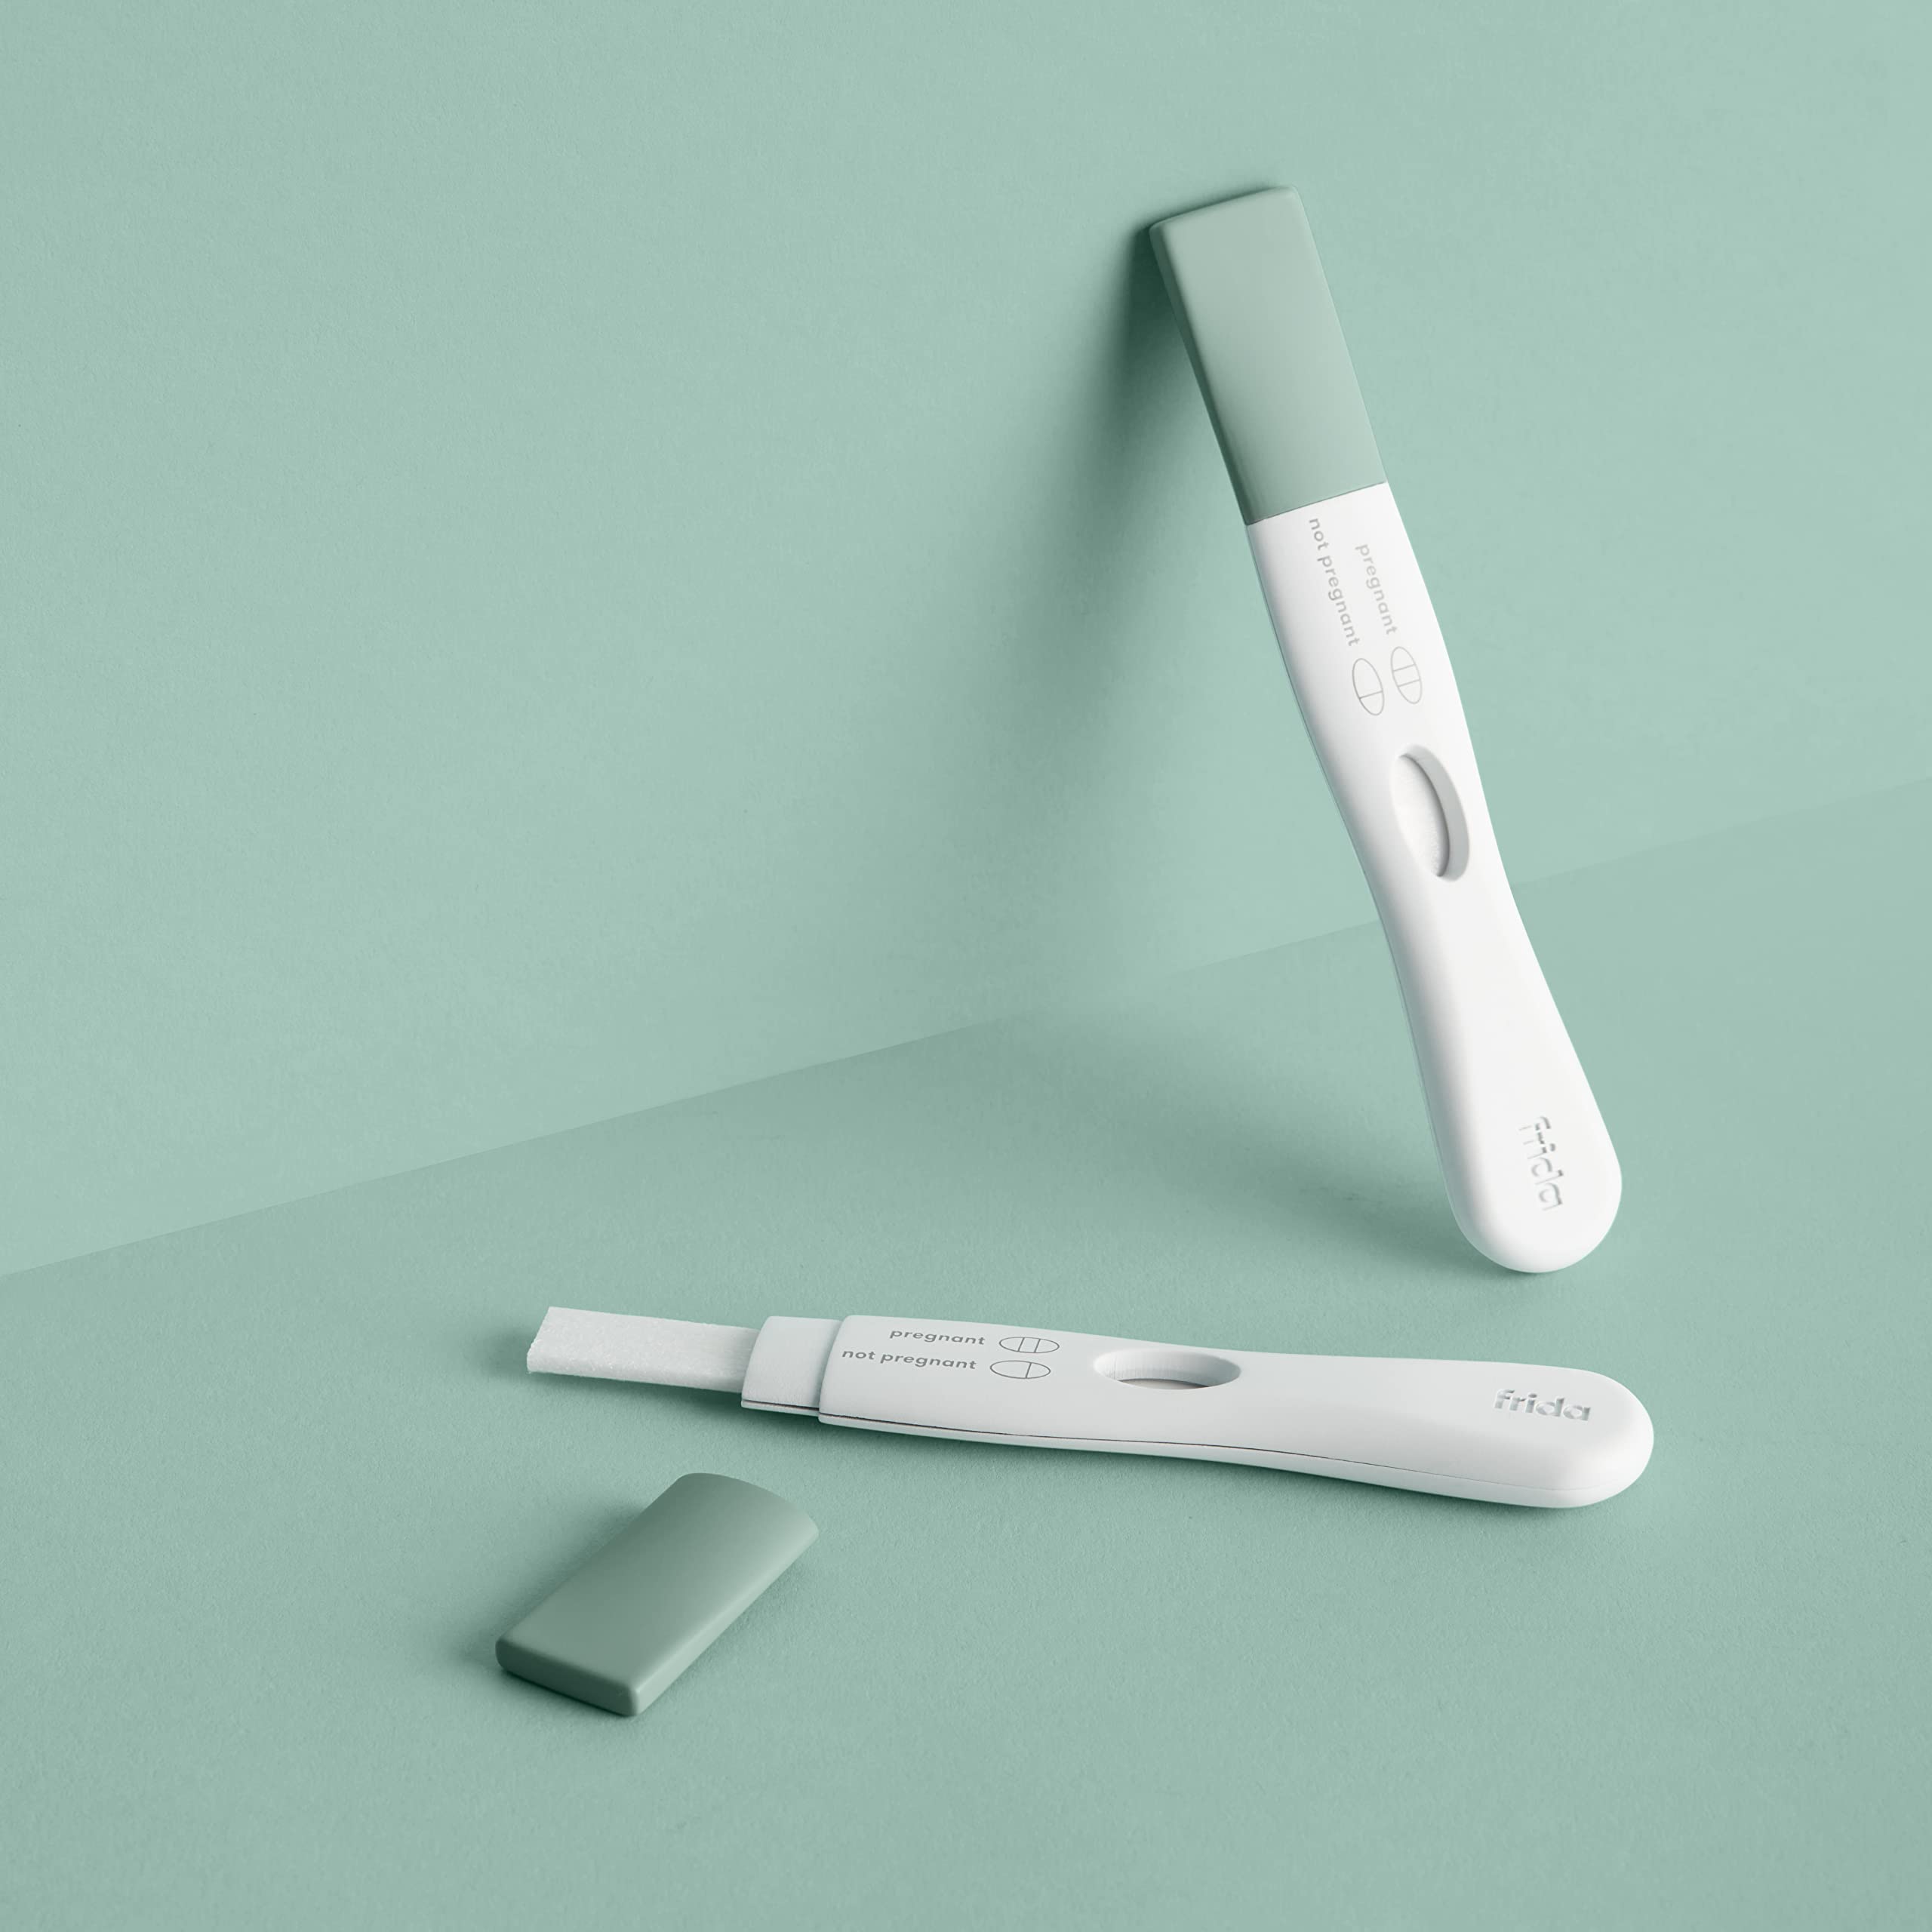 Frida Fertility Early Detection Pregnancy Test - Over 99.9% Accurate, Early Results + Detects in 3 Minutes, Simple + Easy to Use - 2 Tests